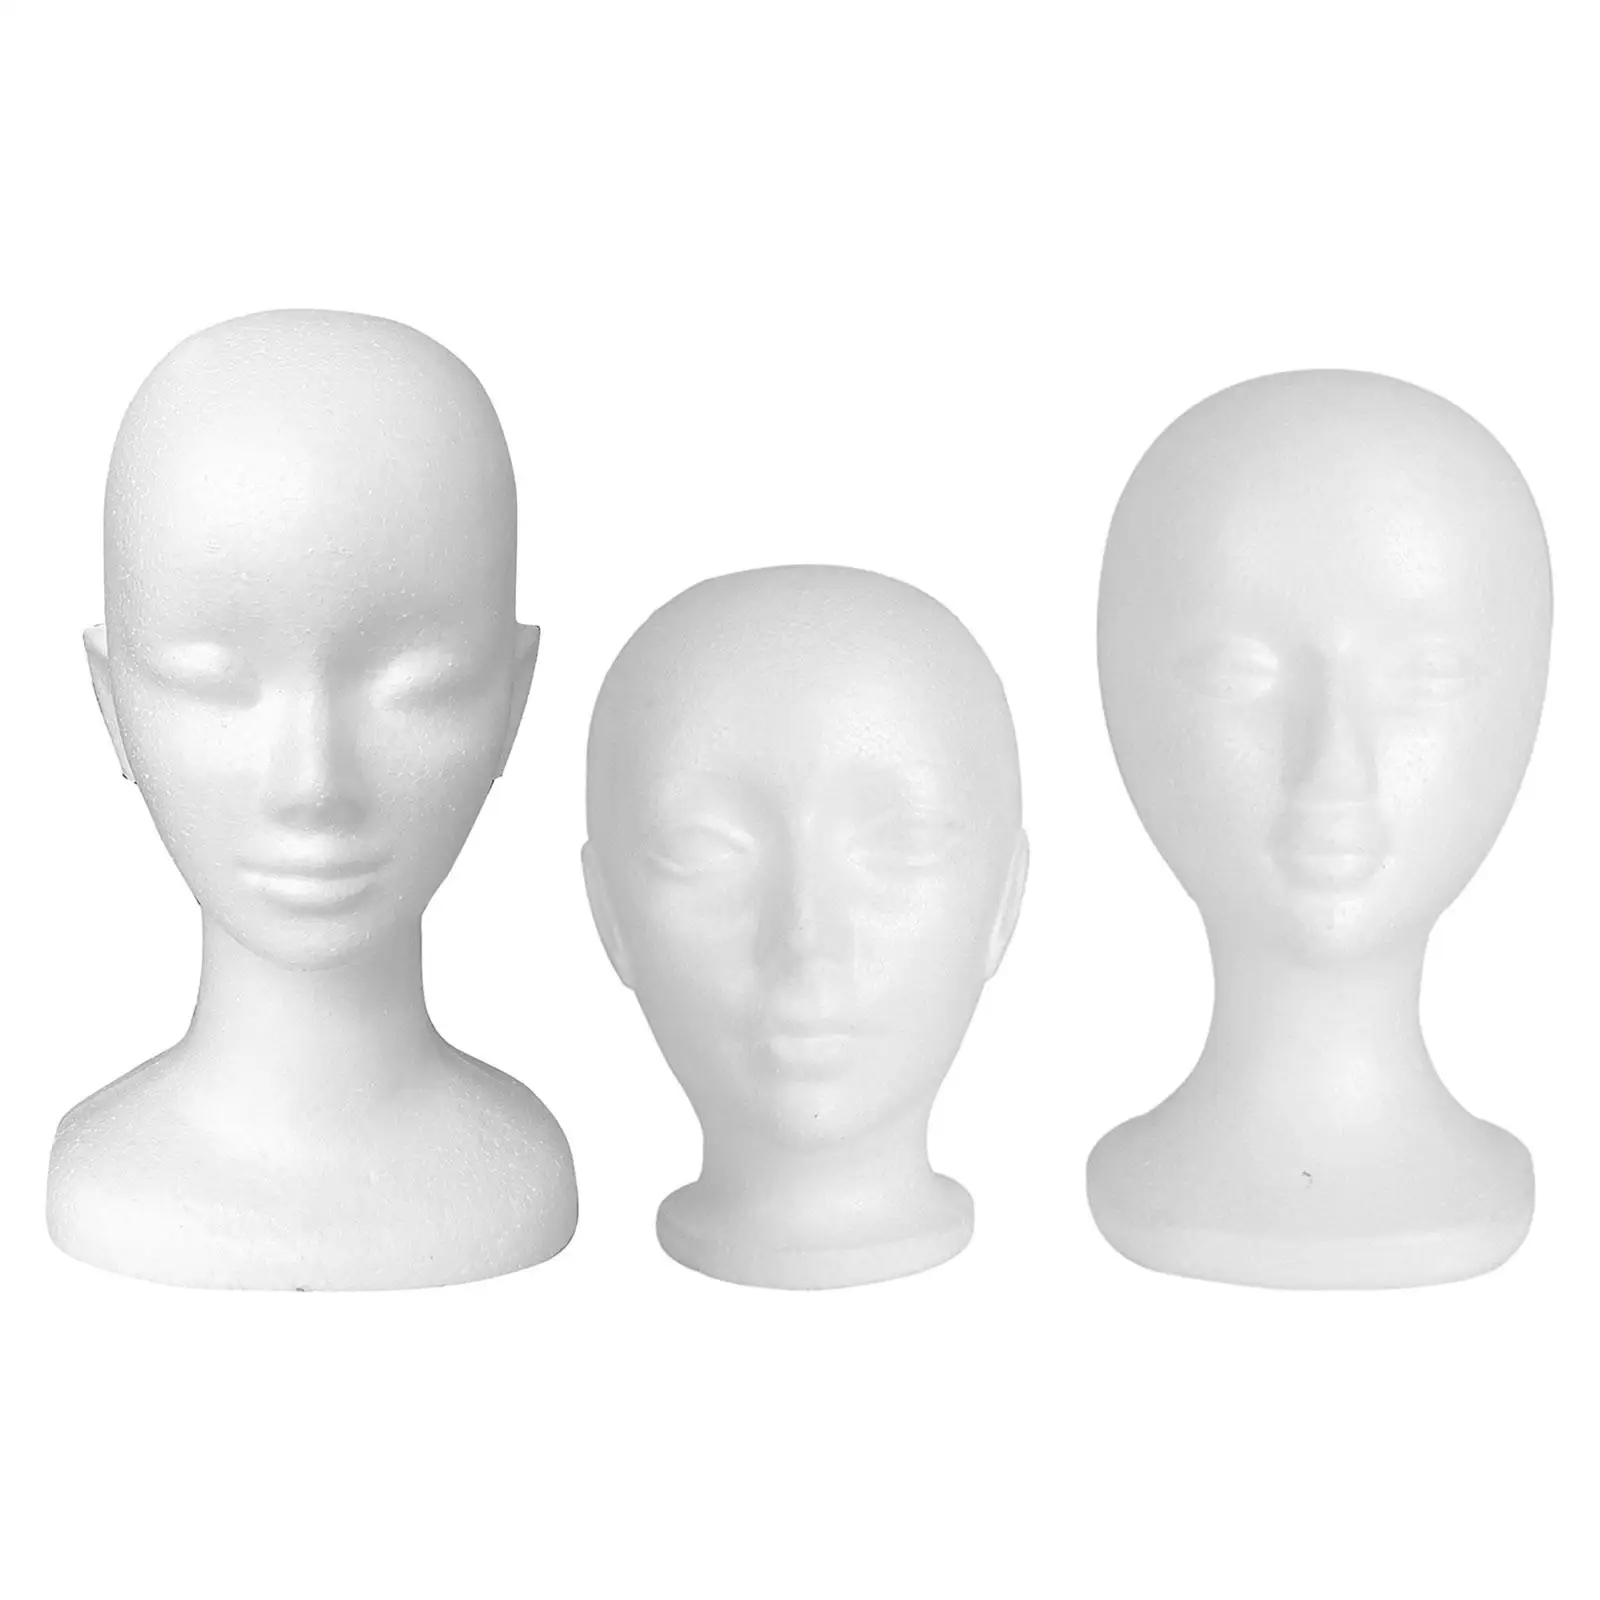 Mannequin Head Holder White Lightweight Scarf Jewelry Display for Hairpieces Jewelry Headwear Sunglasses Barbershop